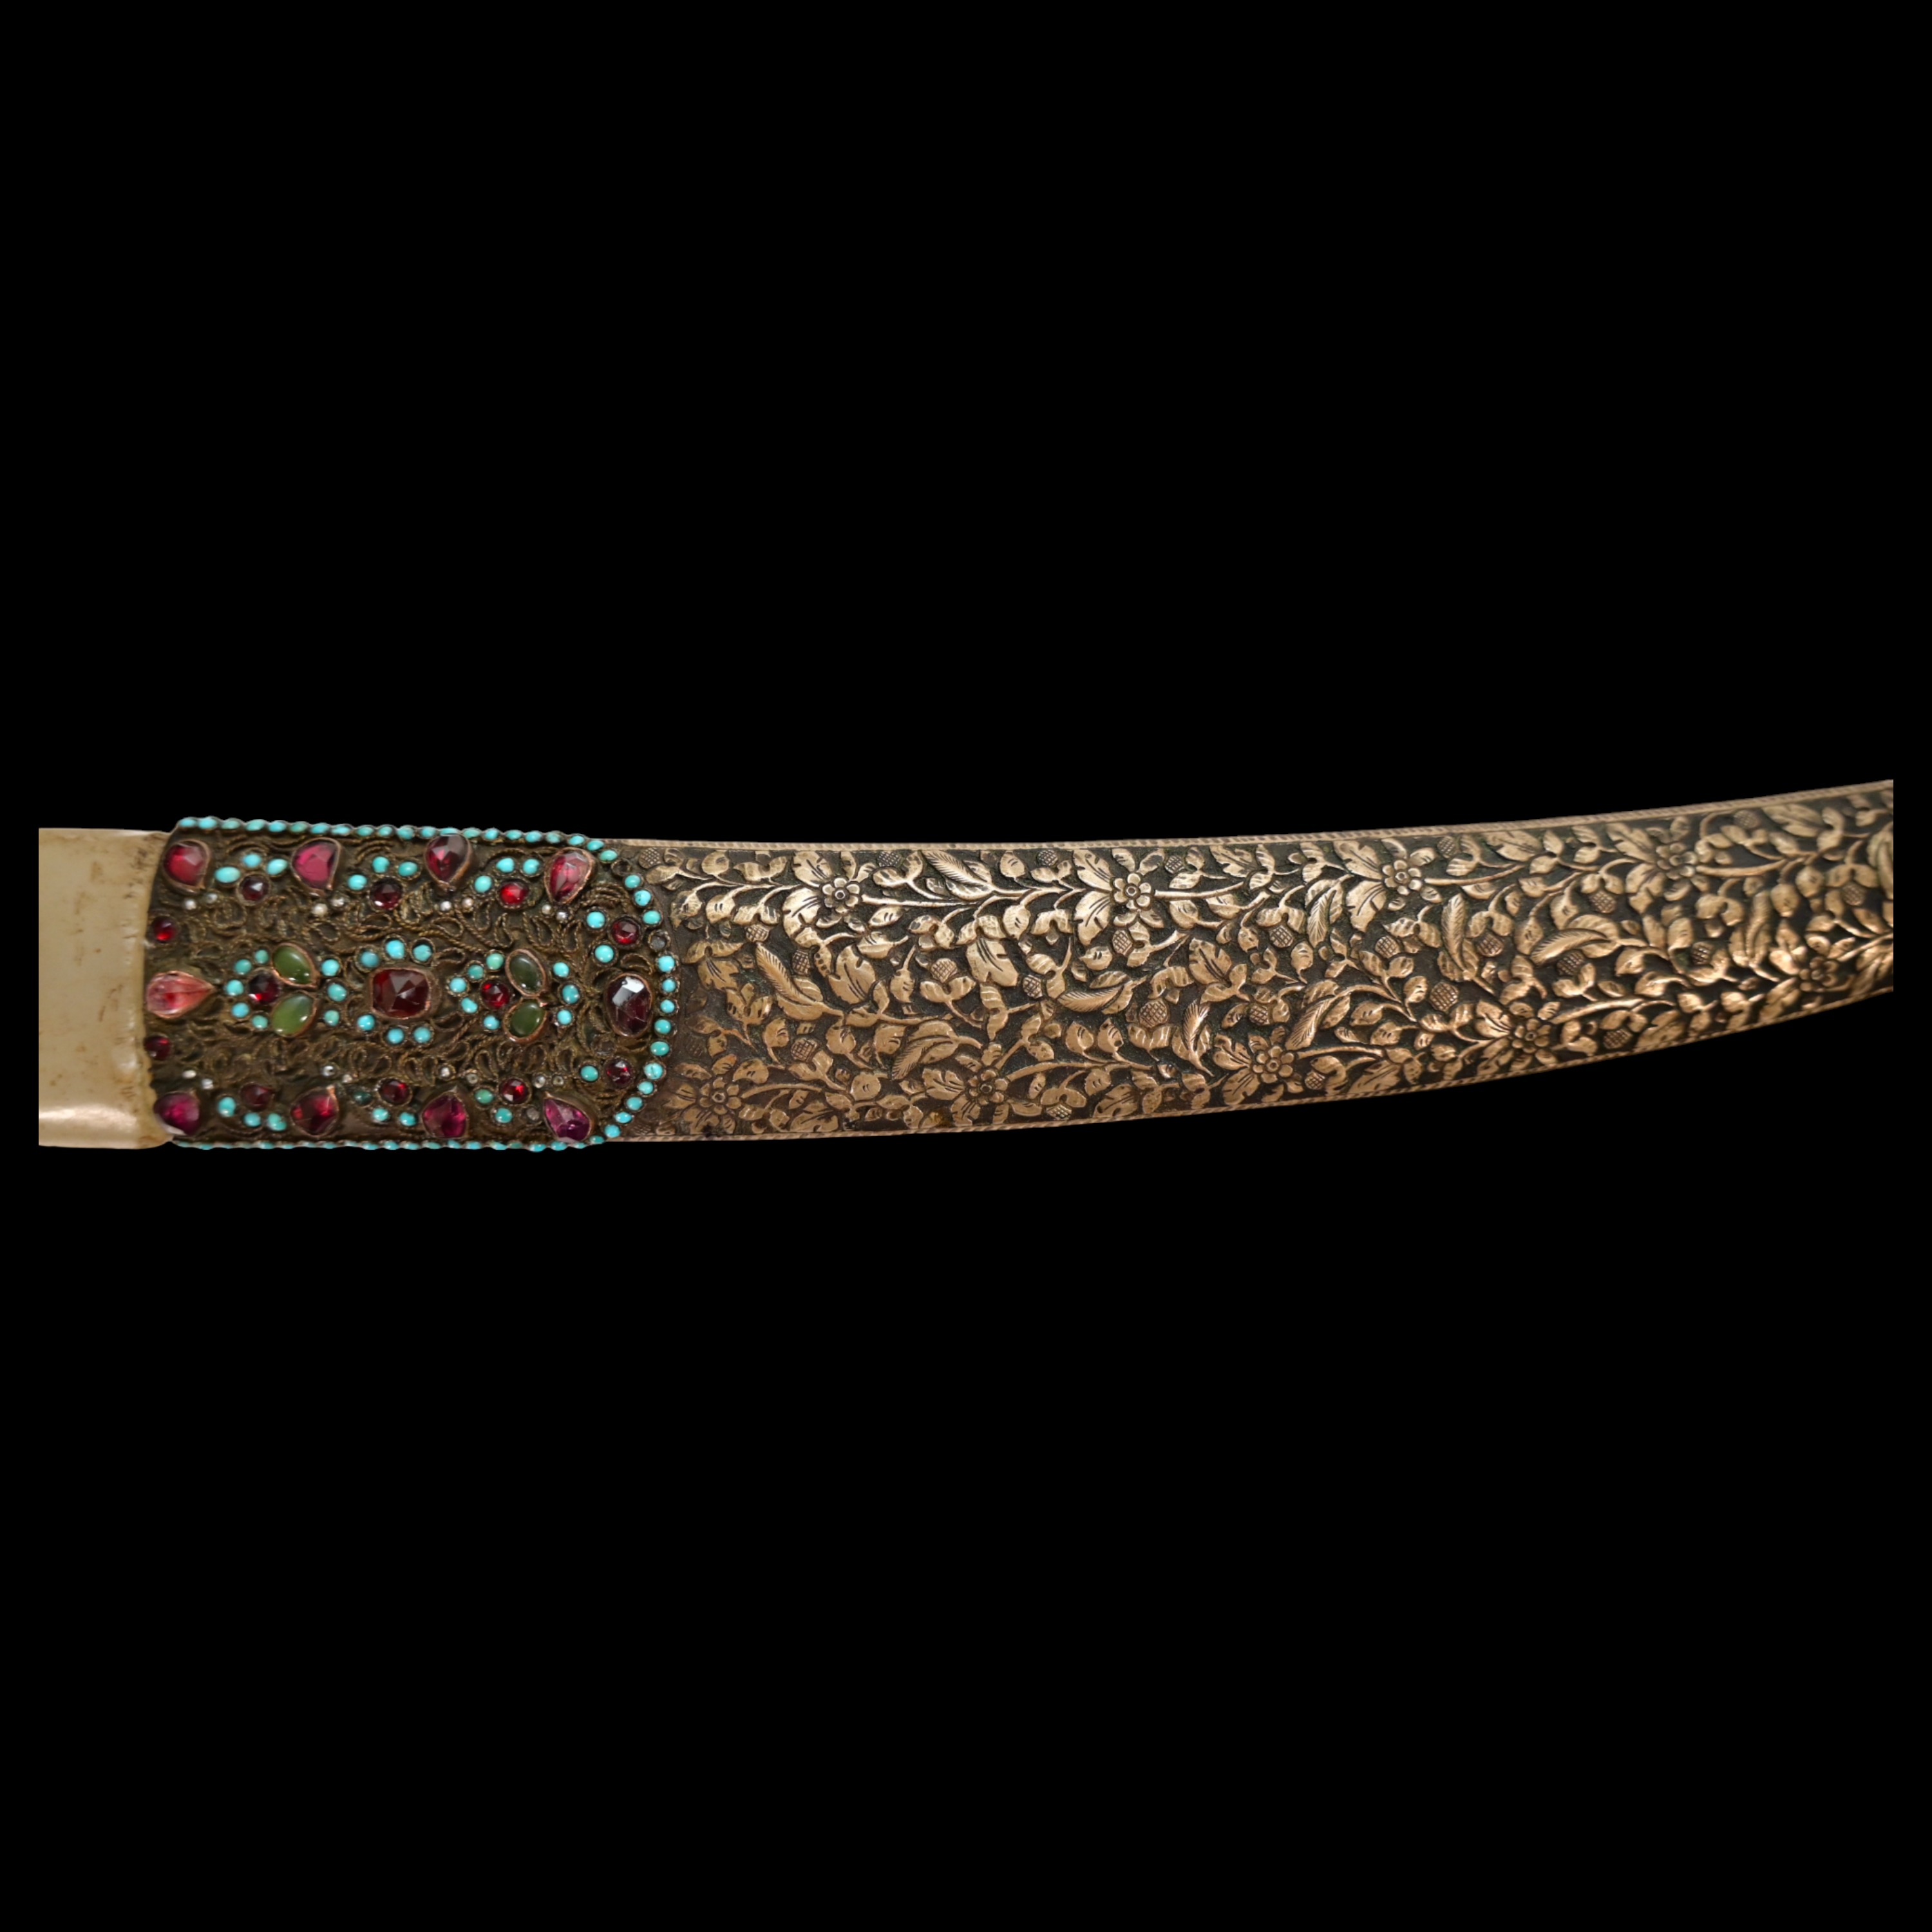 Very rare Dagger with jade handle, Wootz blade, precious stones and gold, Ottoman Empire, 18th C. - Image 5 of 19